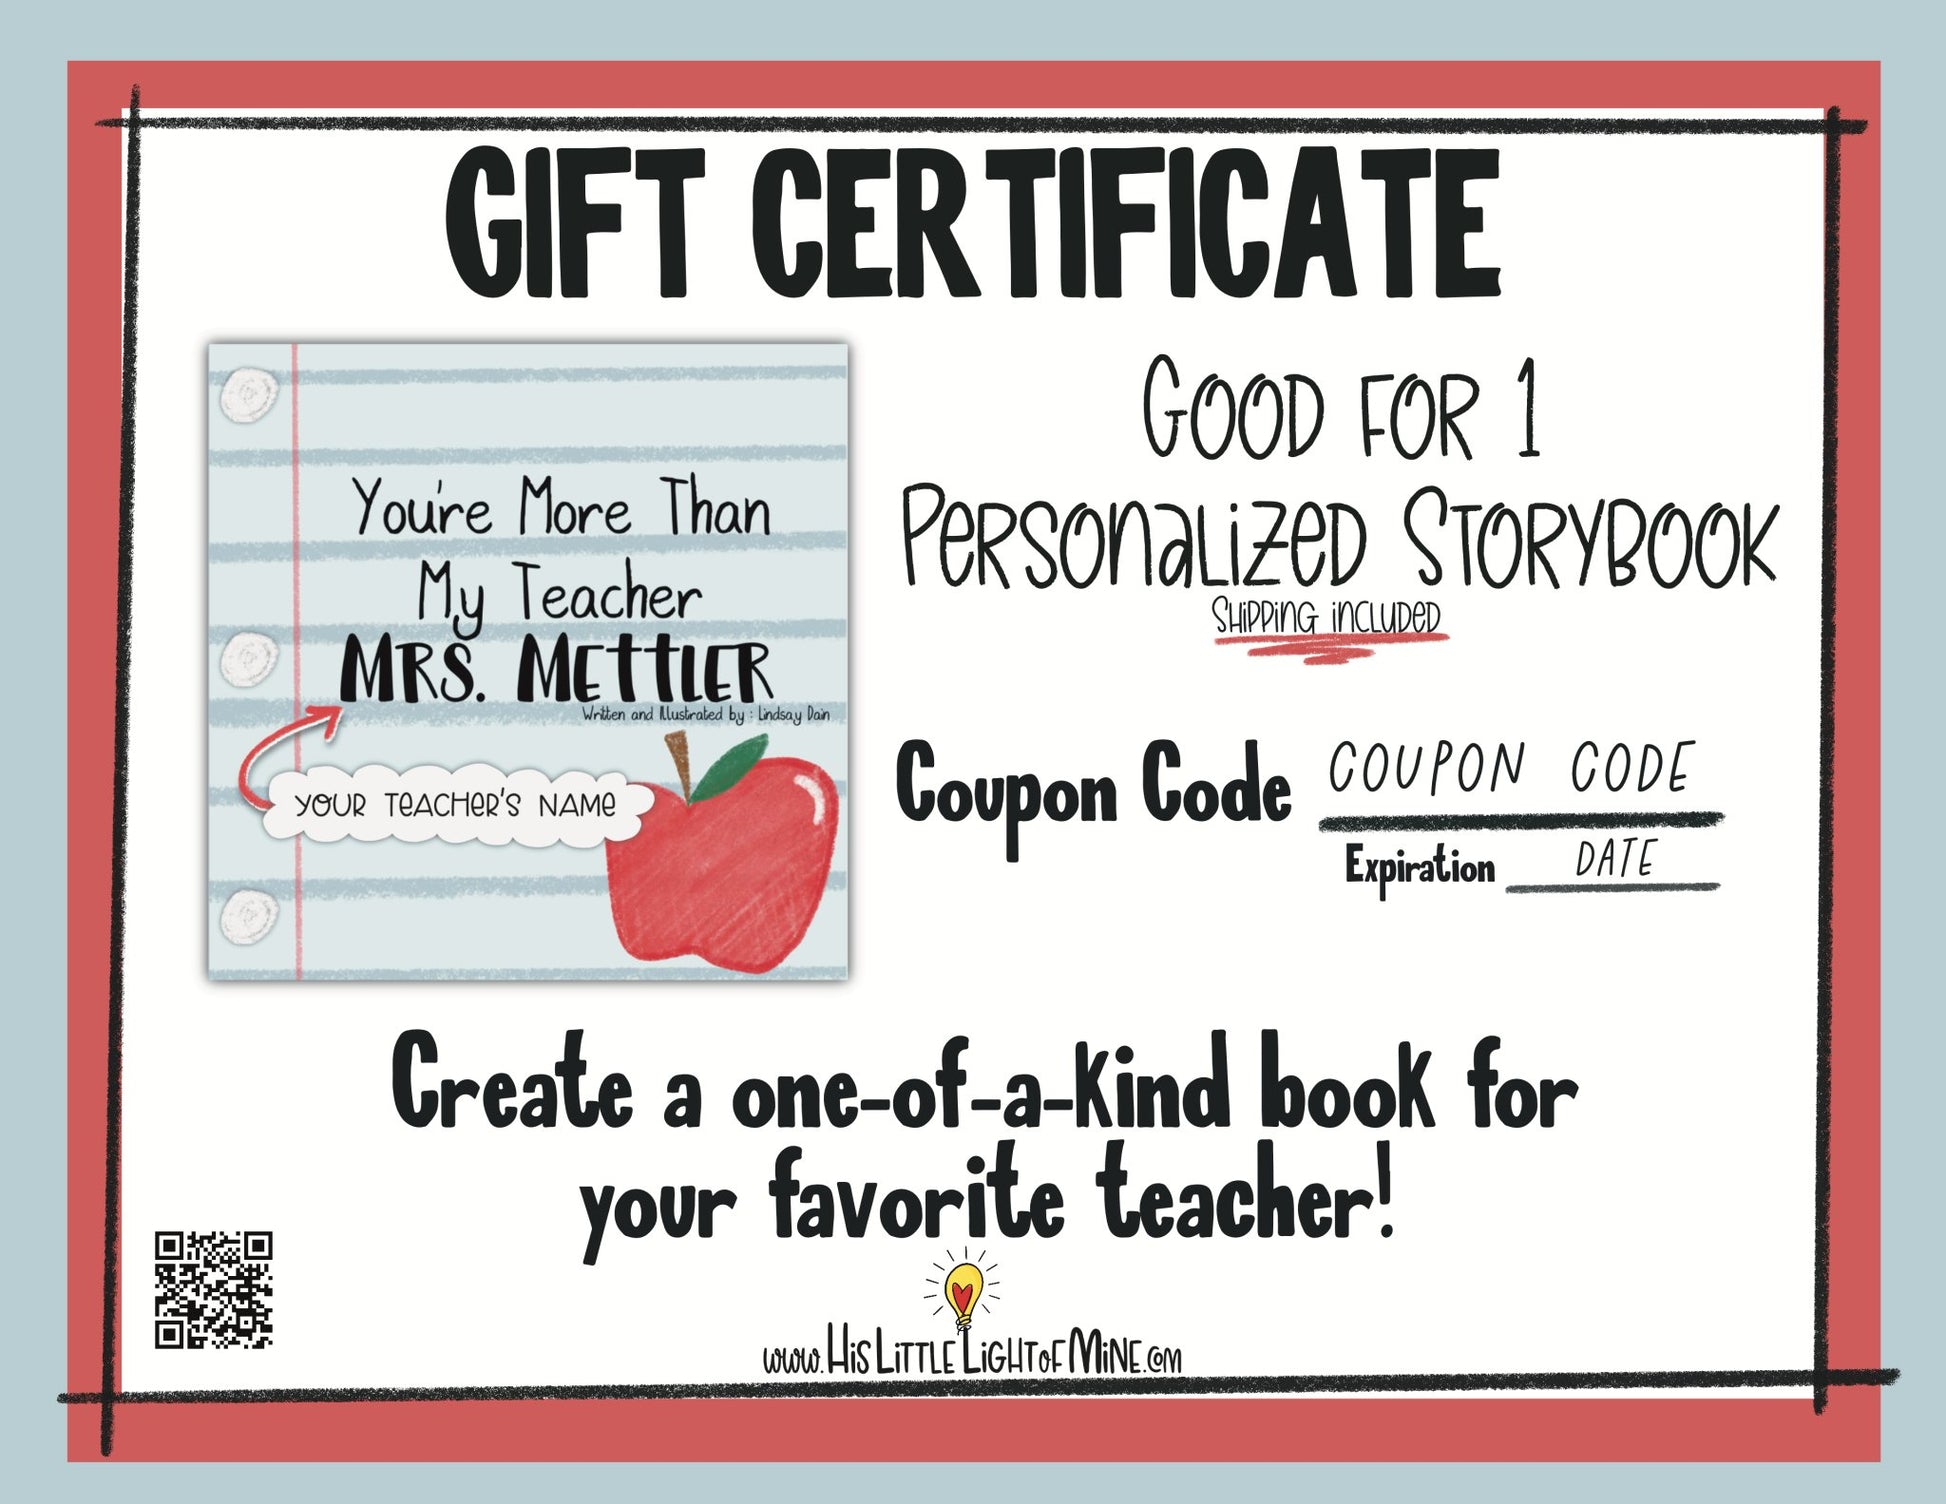 The self-published personalized book “You’re More Than My Teacher” gift certificate image